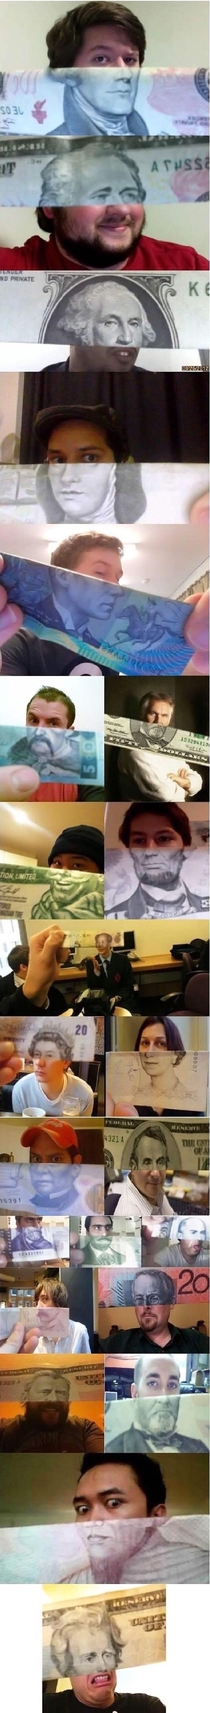 Lining up peoples faces with faces on money is too good